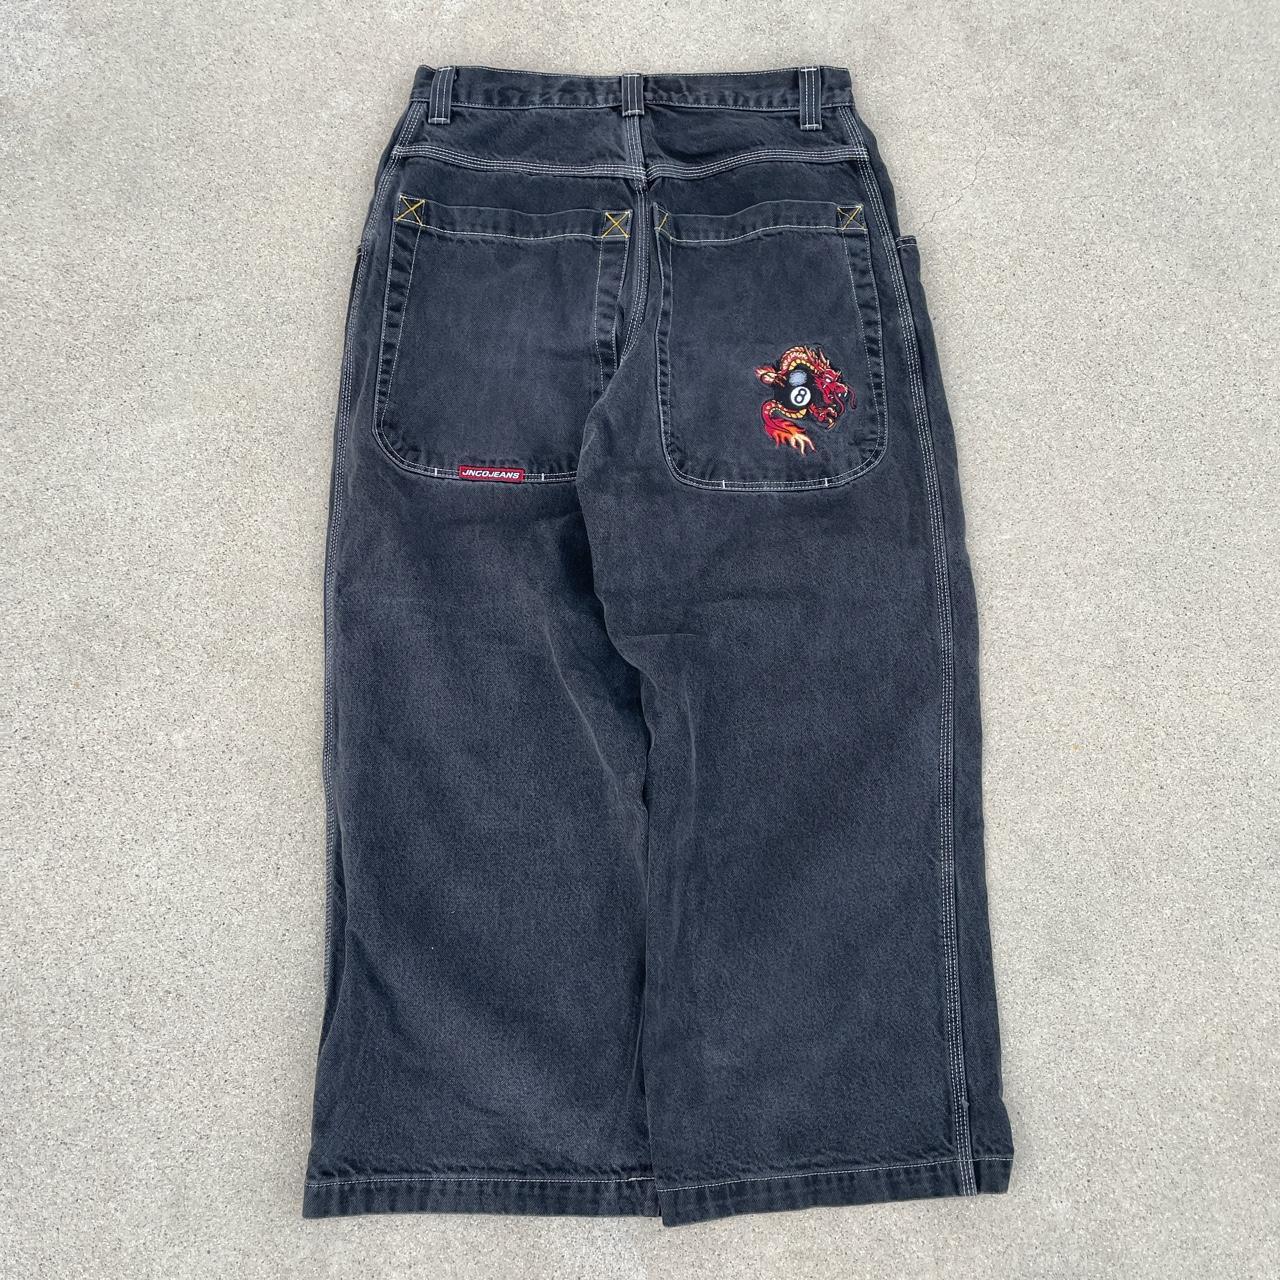 8 BALL DRAGON JNCOS PRICE IS HIGHEST OFFER -please... - Depop